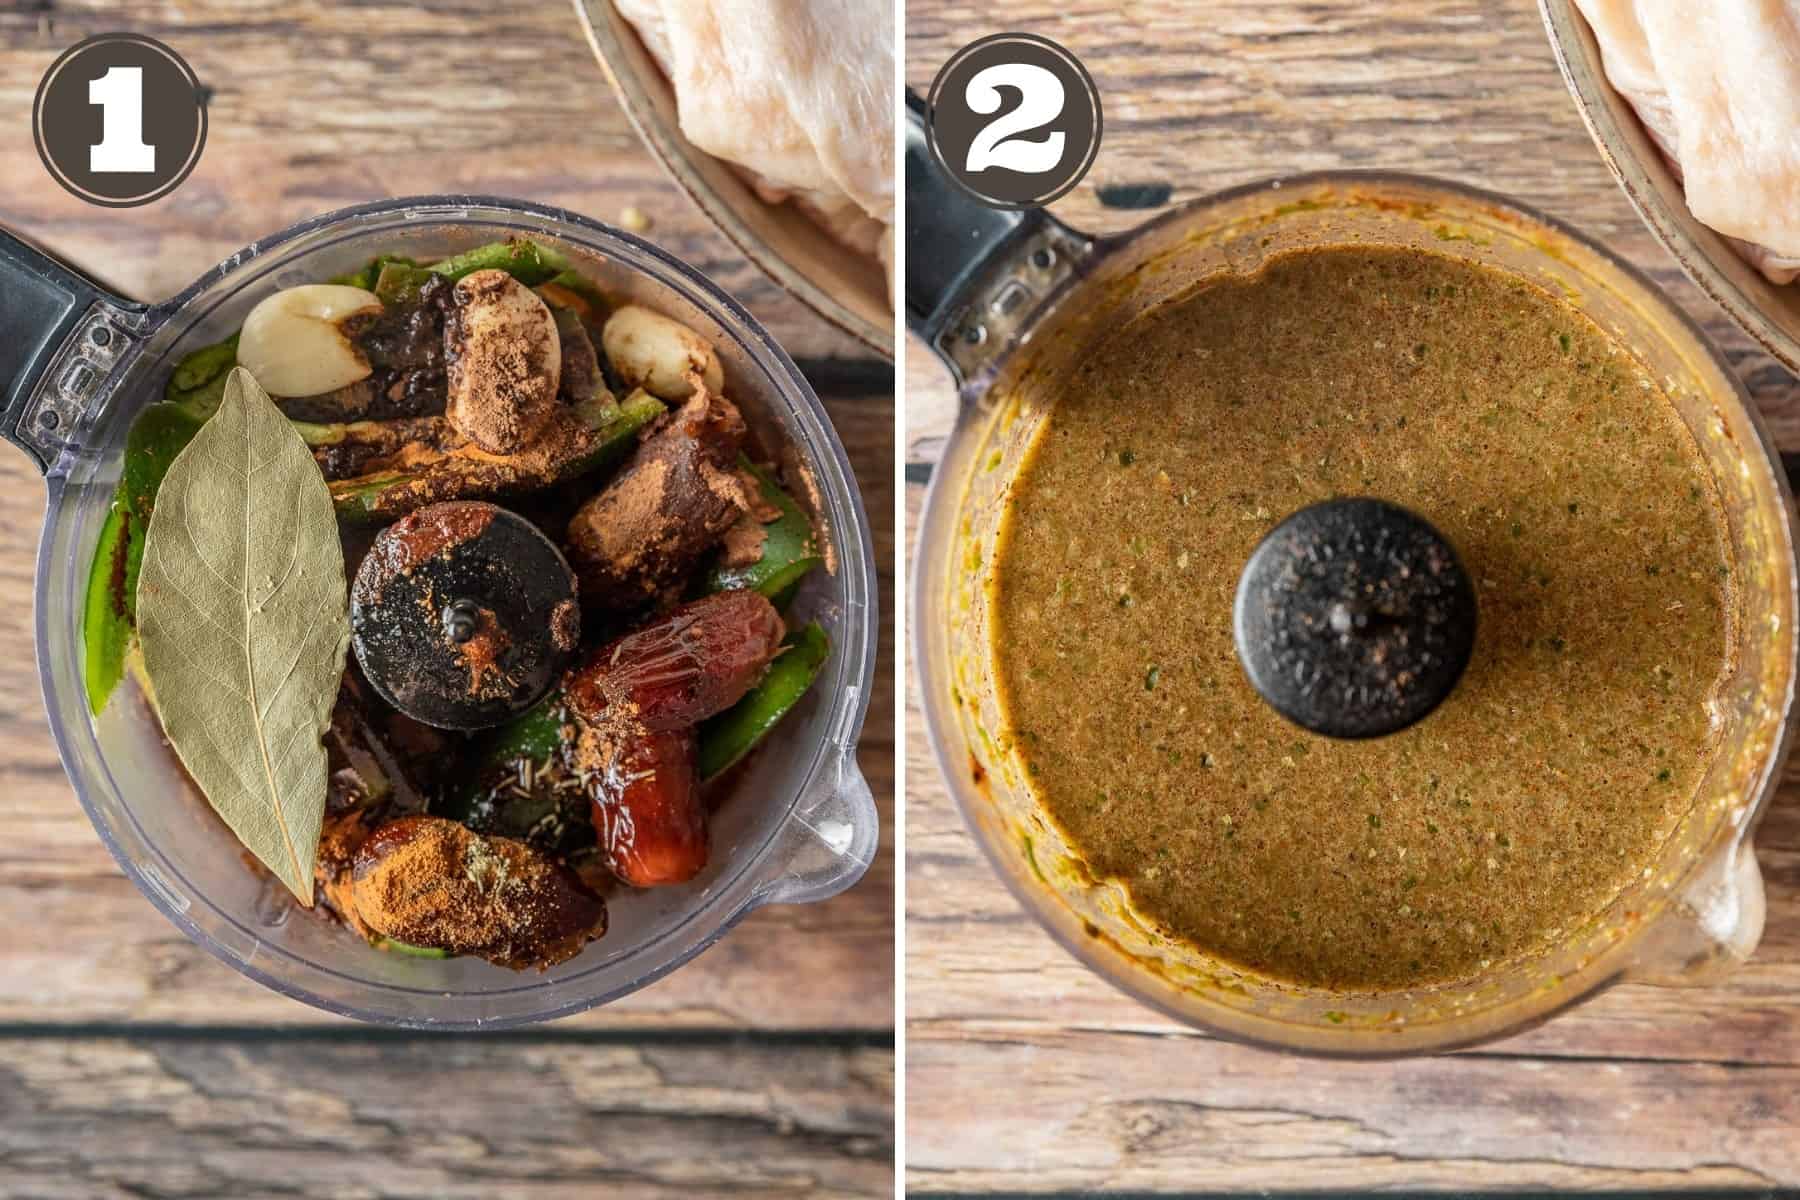 Side by side photos of jerk marinade ingredients in a food processor before and after blending.